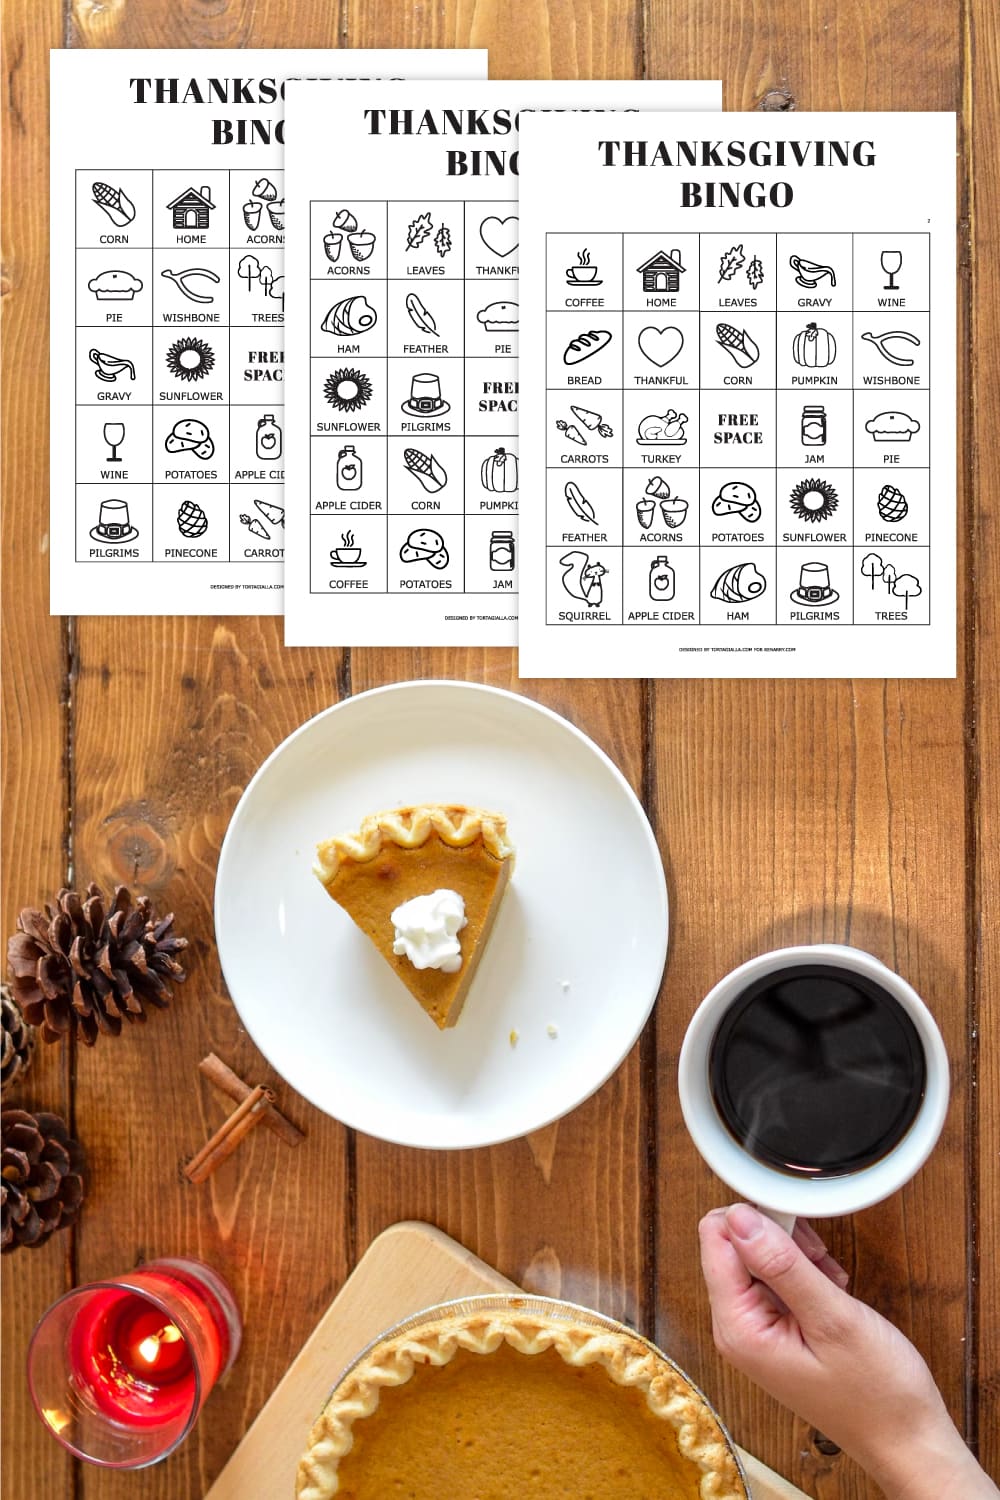 Preview of printable bingo pages with Thanksgiving icons on wooden tabletop with white plate and slice of pie on bottom with hand holding cup of coffee and pinecones and candle burning in lower left. 